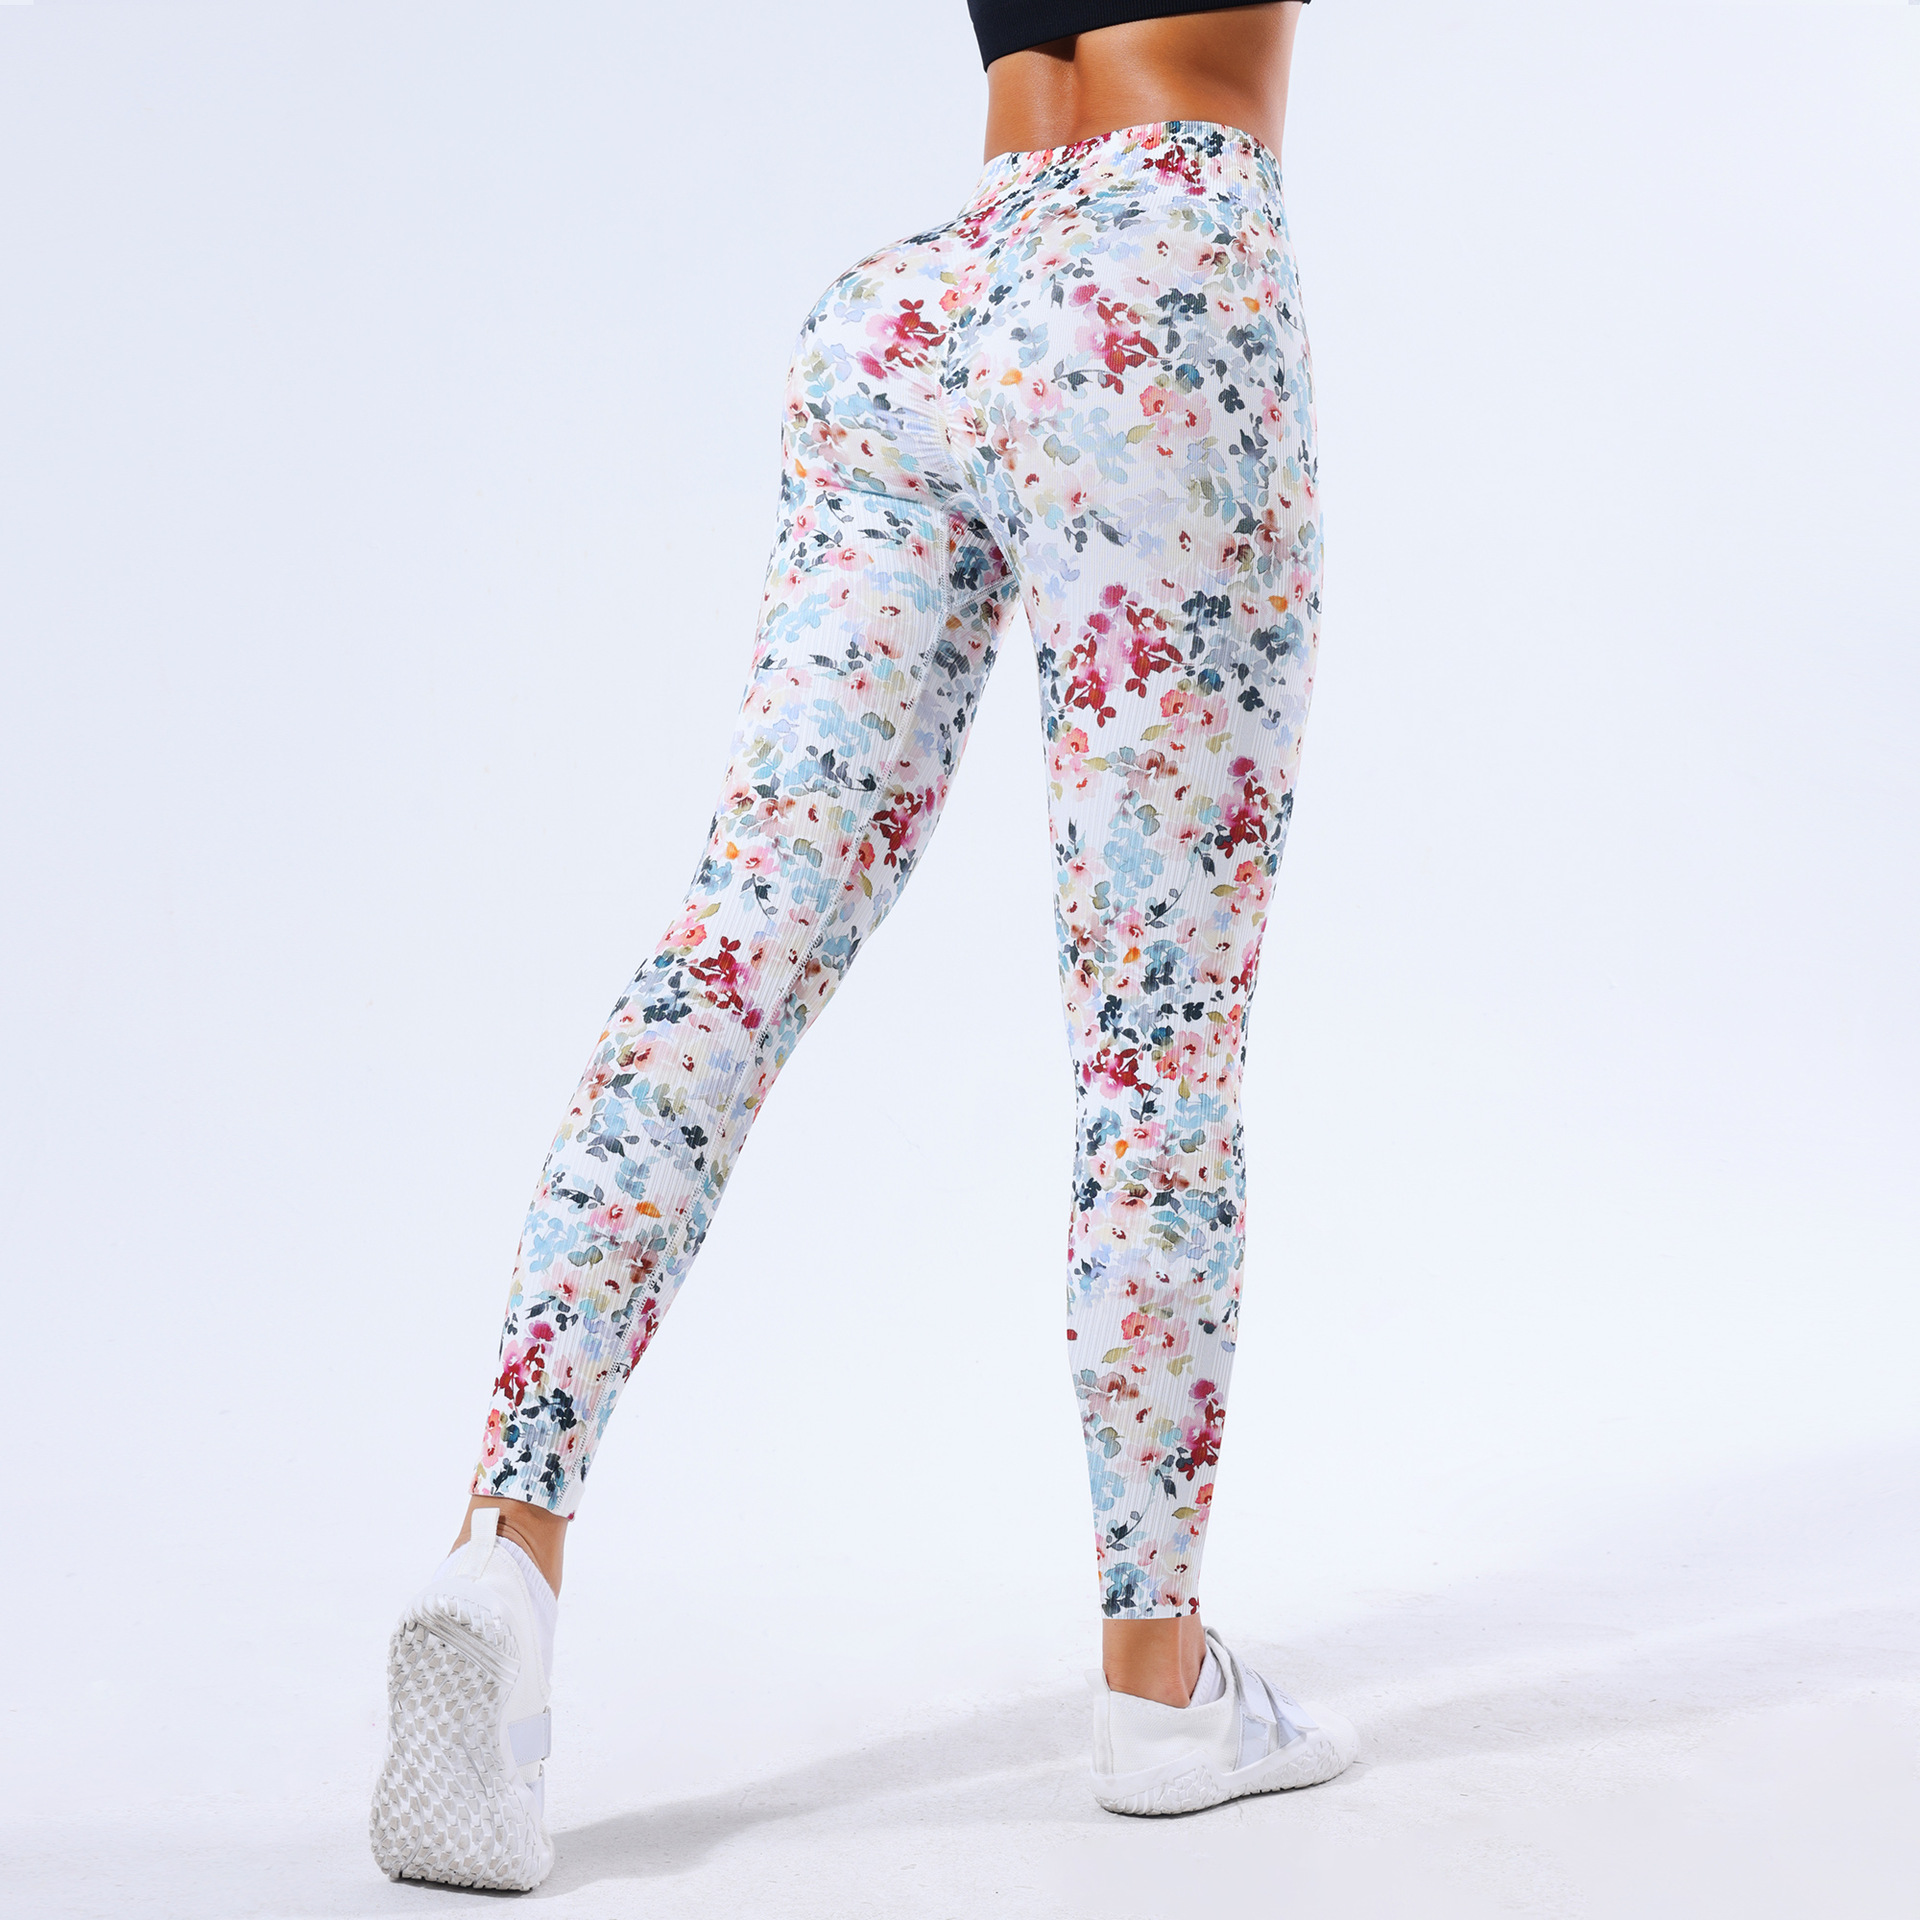 European and American New 3d Printed Yoga Trousers Women's Small Floral Belly Contracting Hip Raise Yoga Pants Peach Hip Exercise Workout Pants